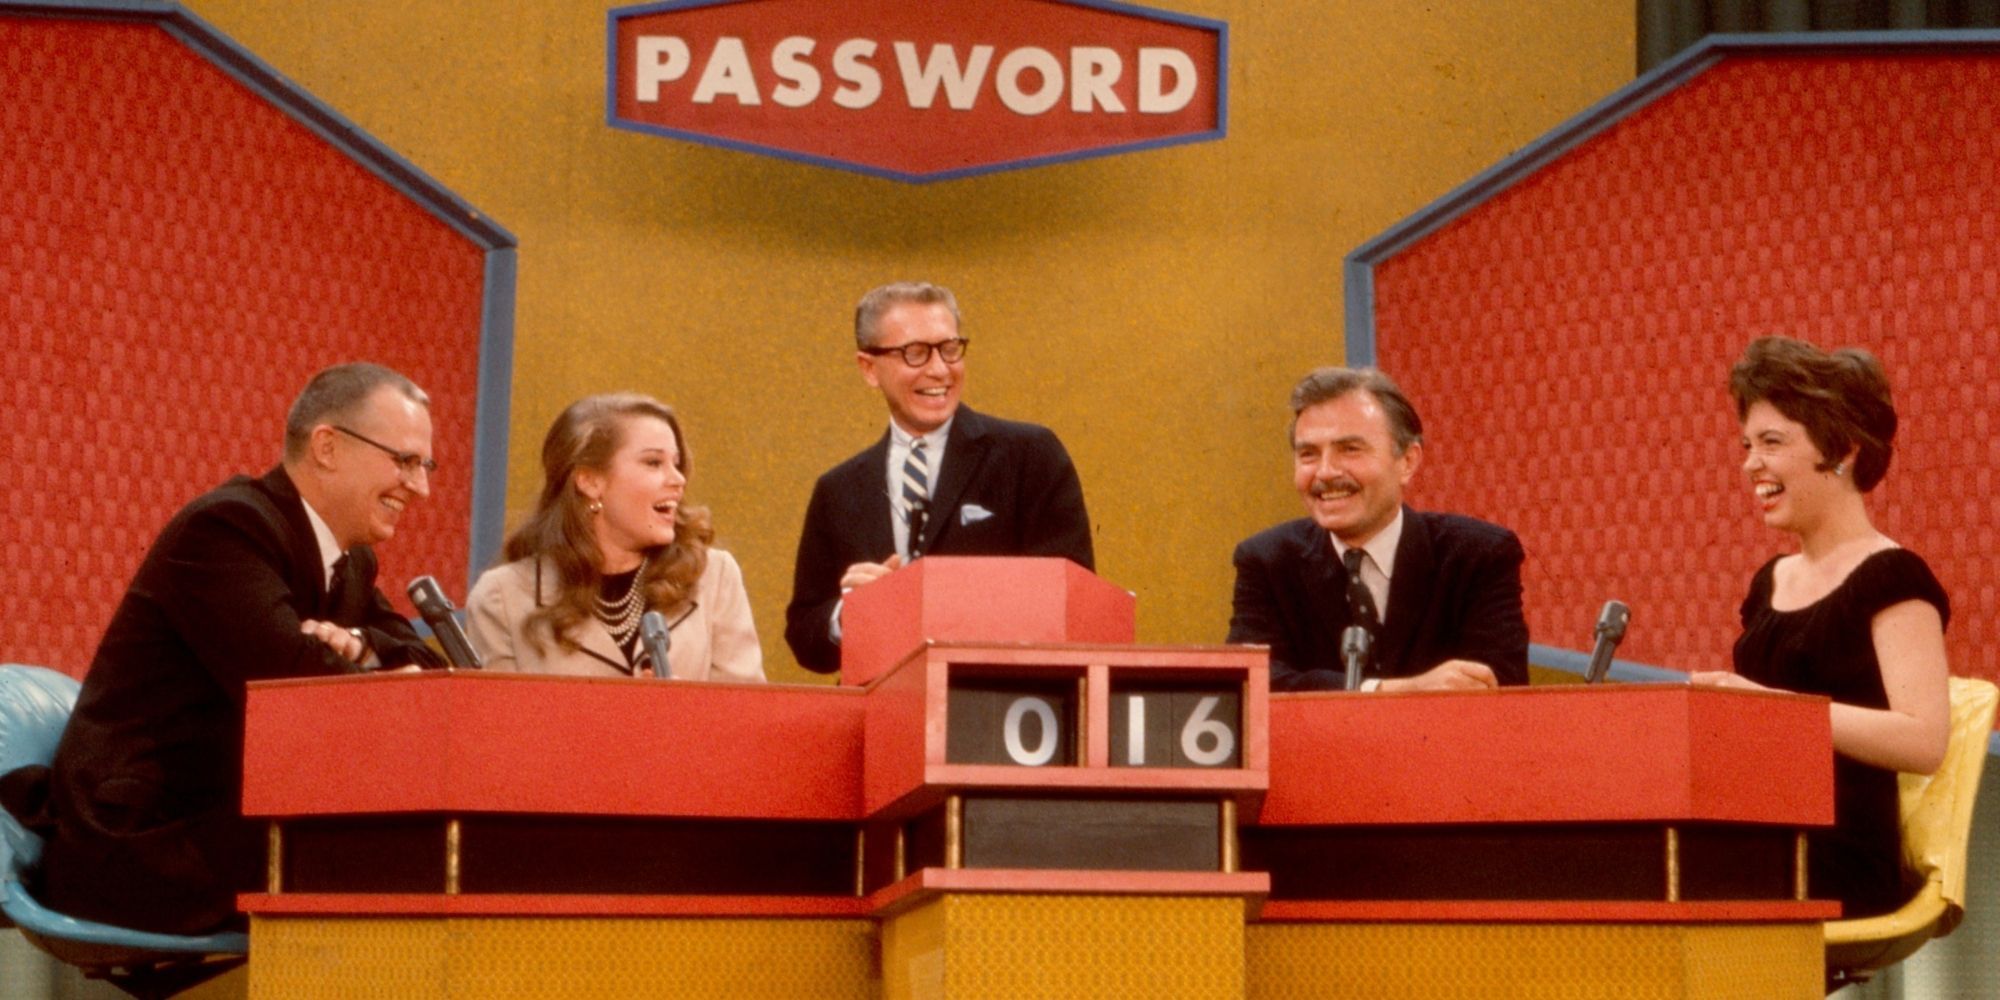 Four competitors in the Password game show grinning